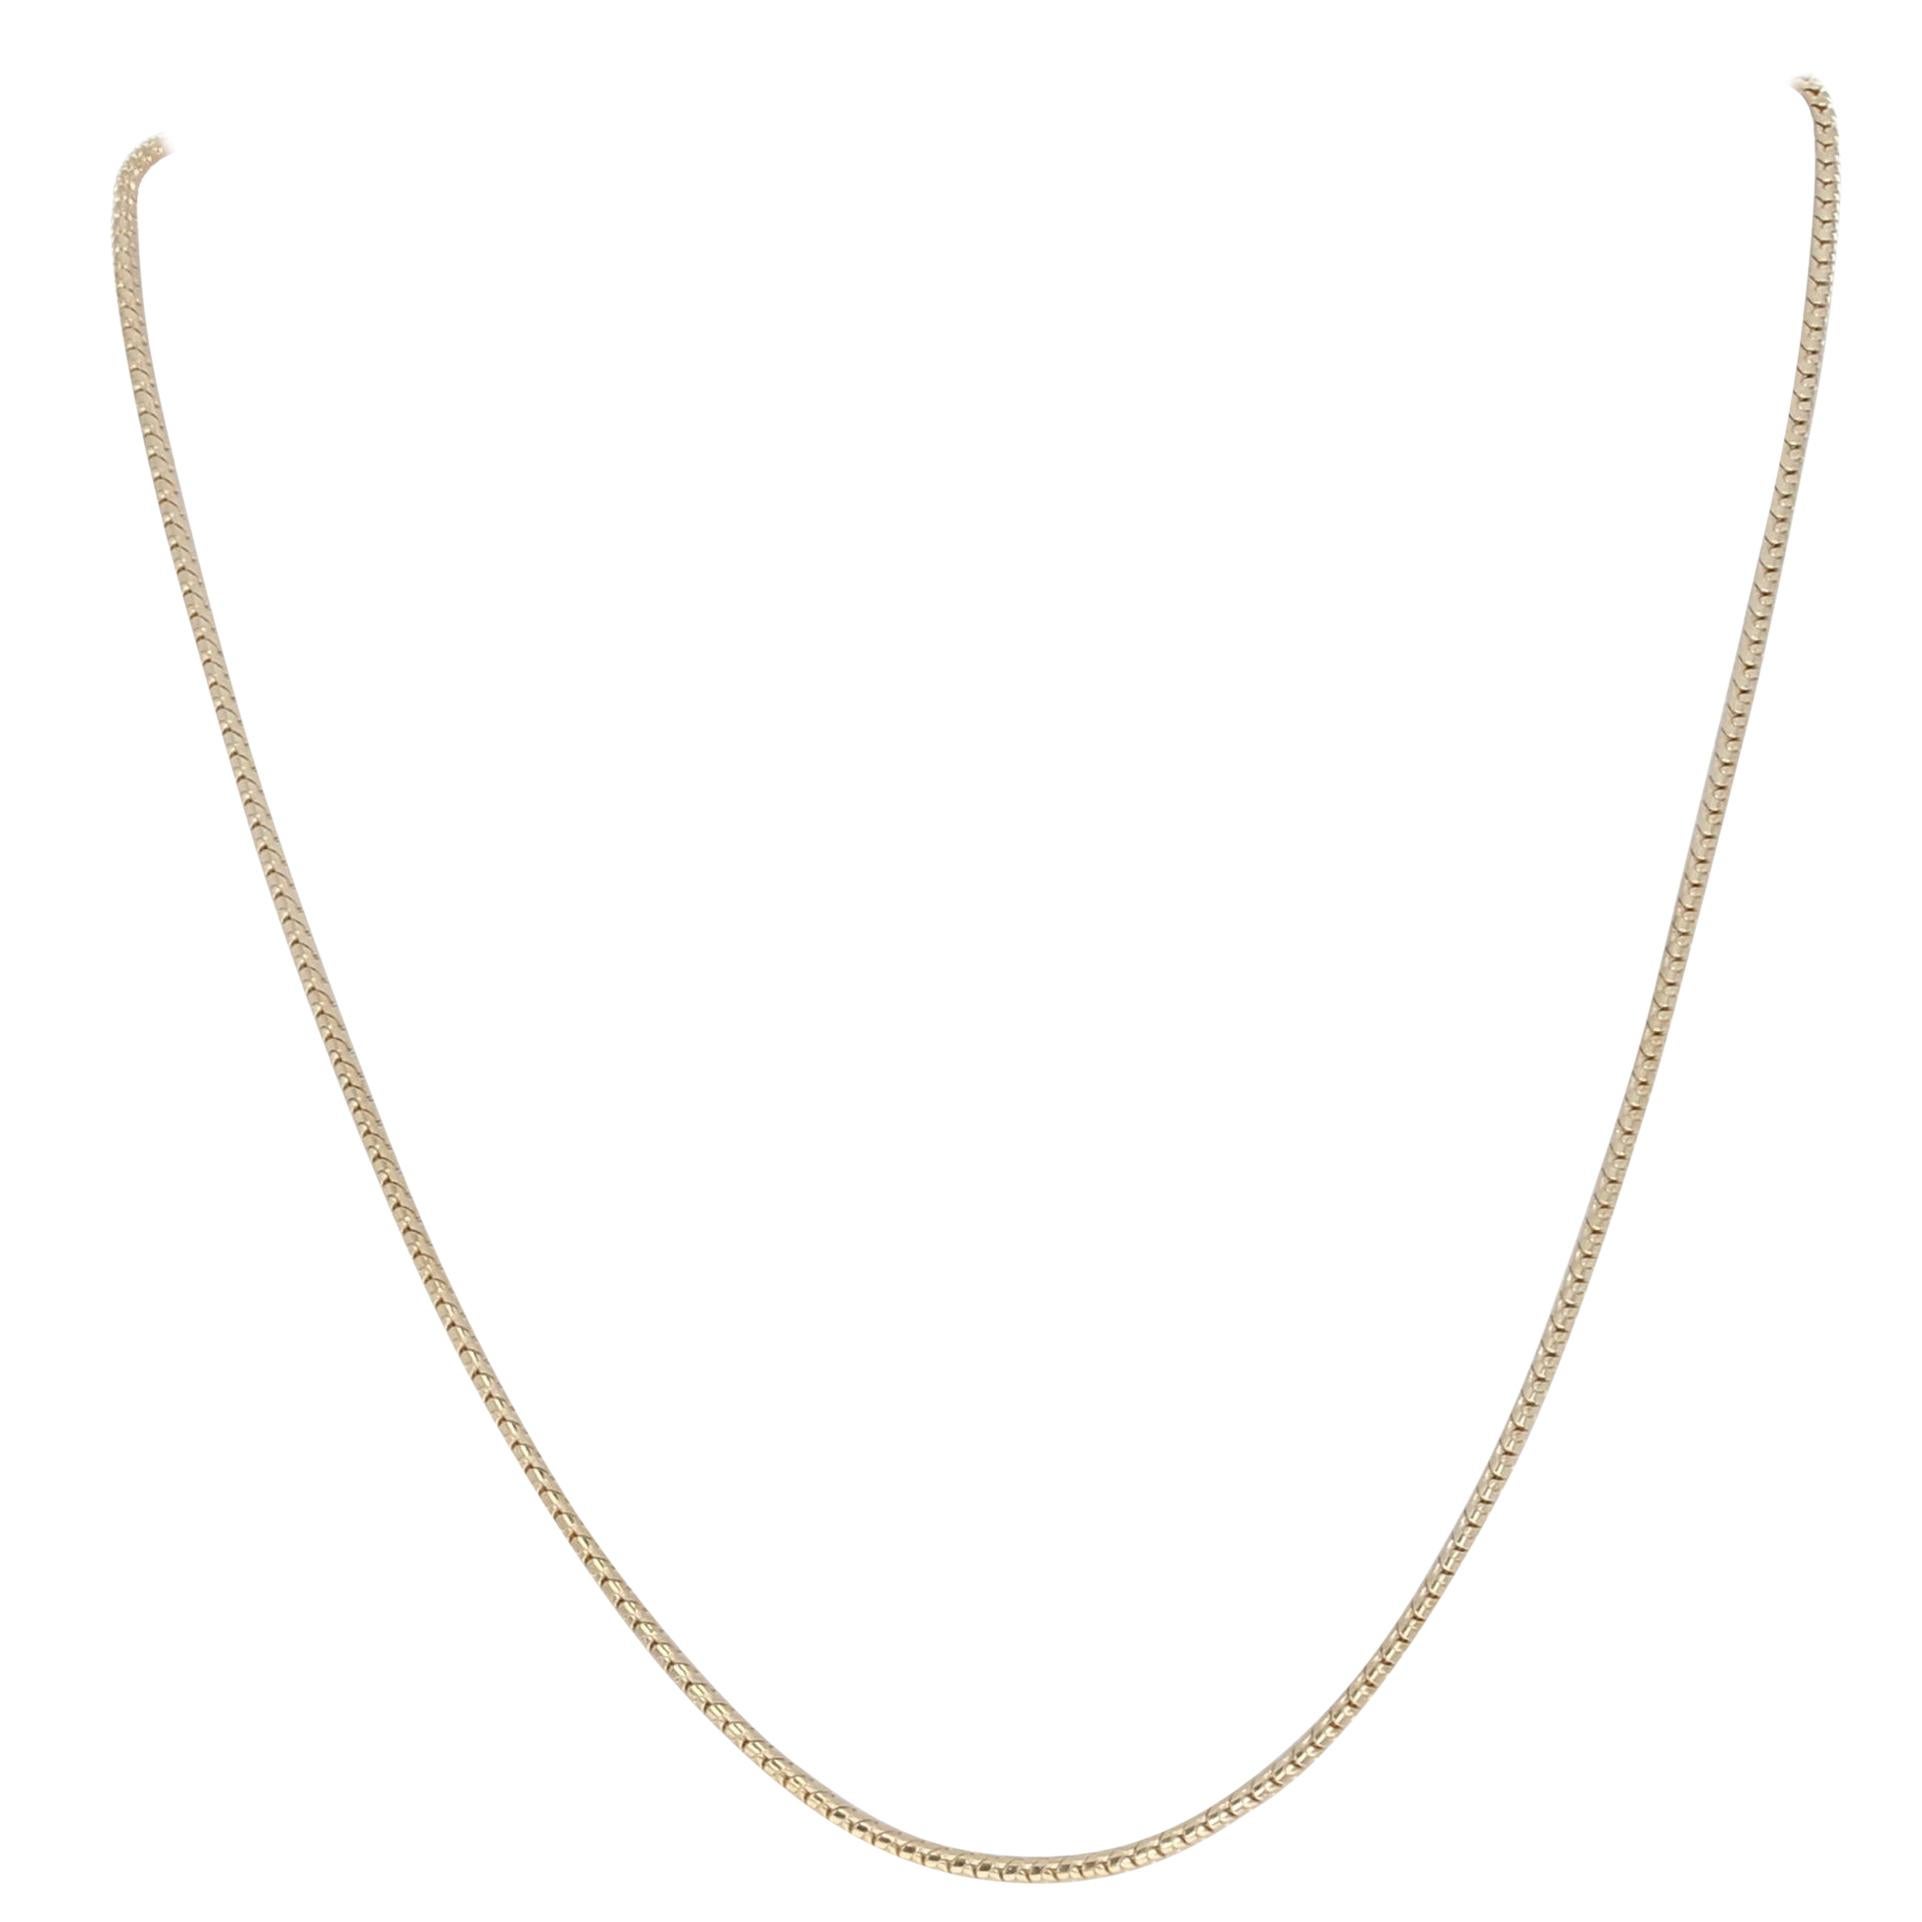 Snake Chain Necklace, 14 Karat Yellow Gold Spring Ring Clasp